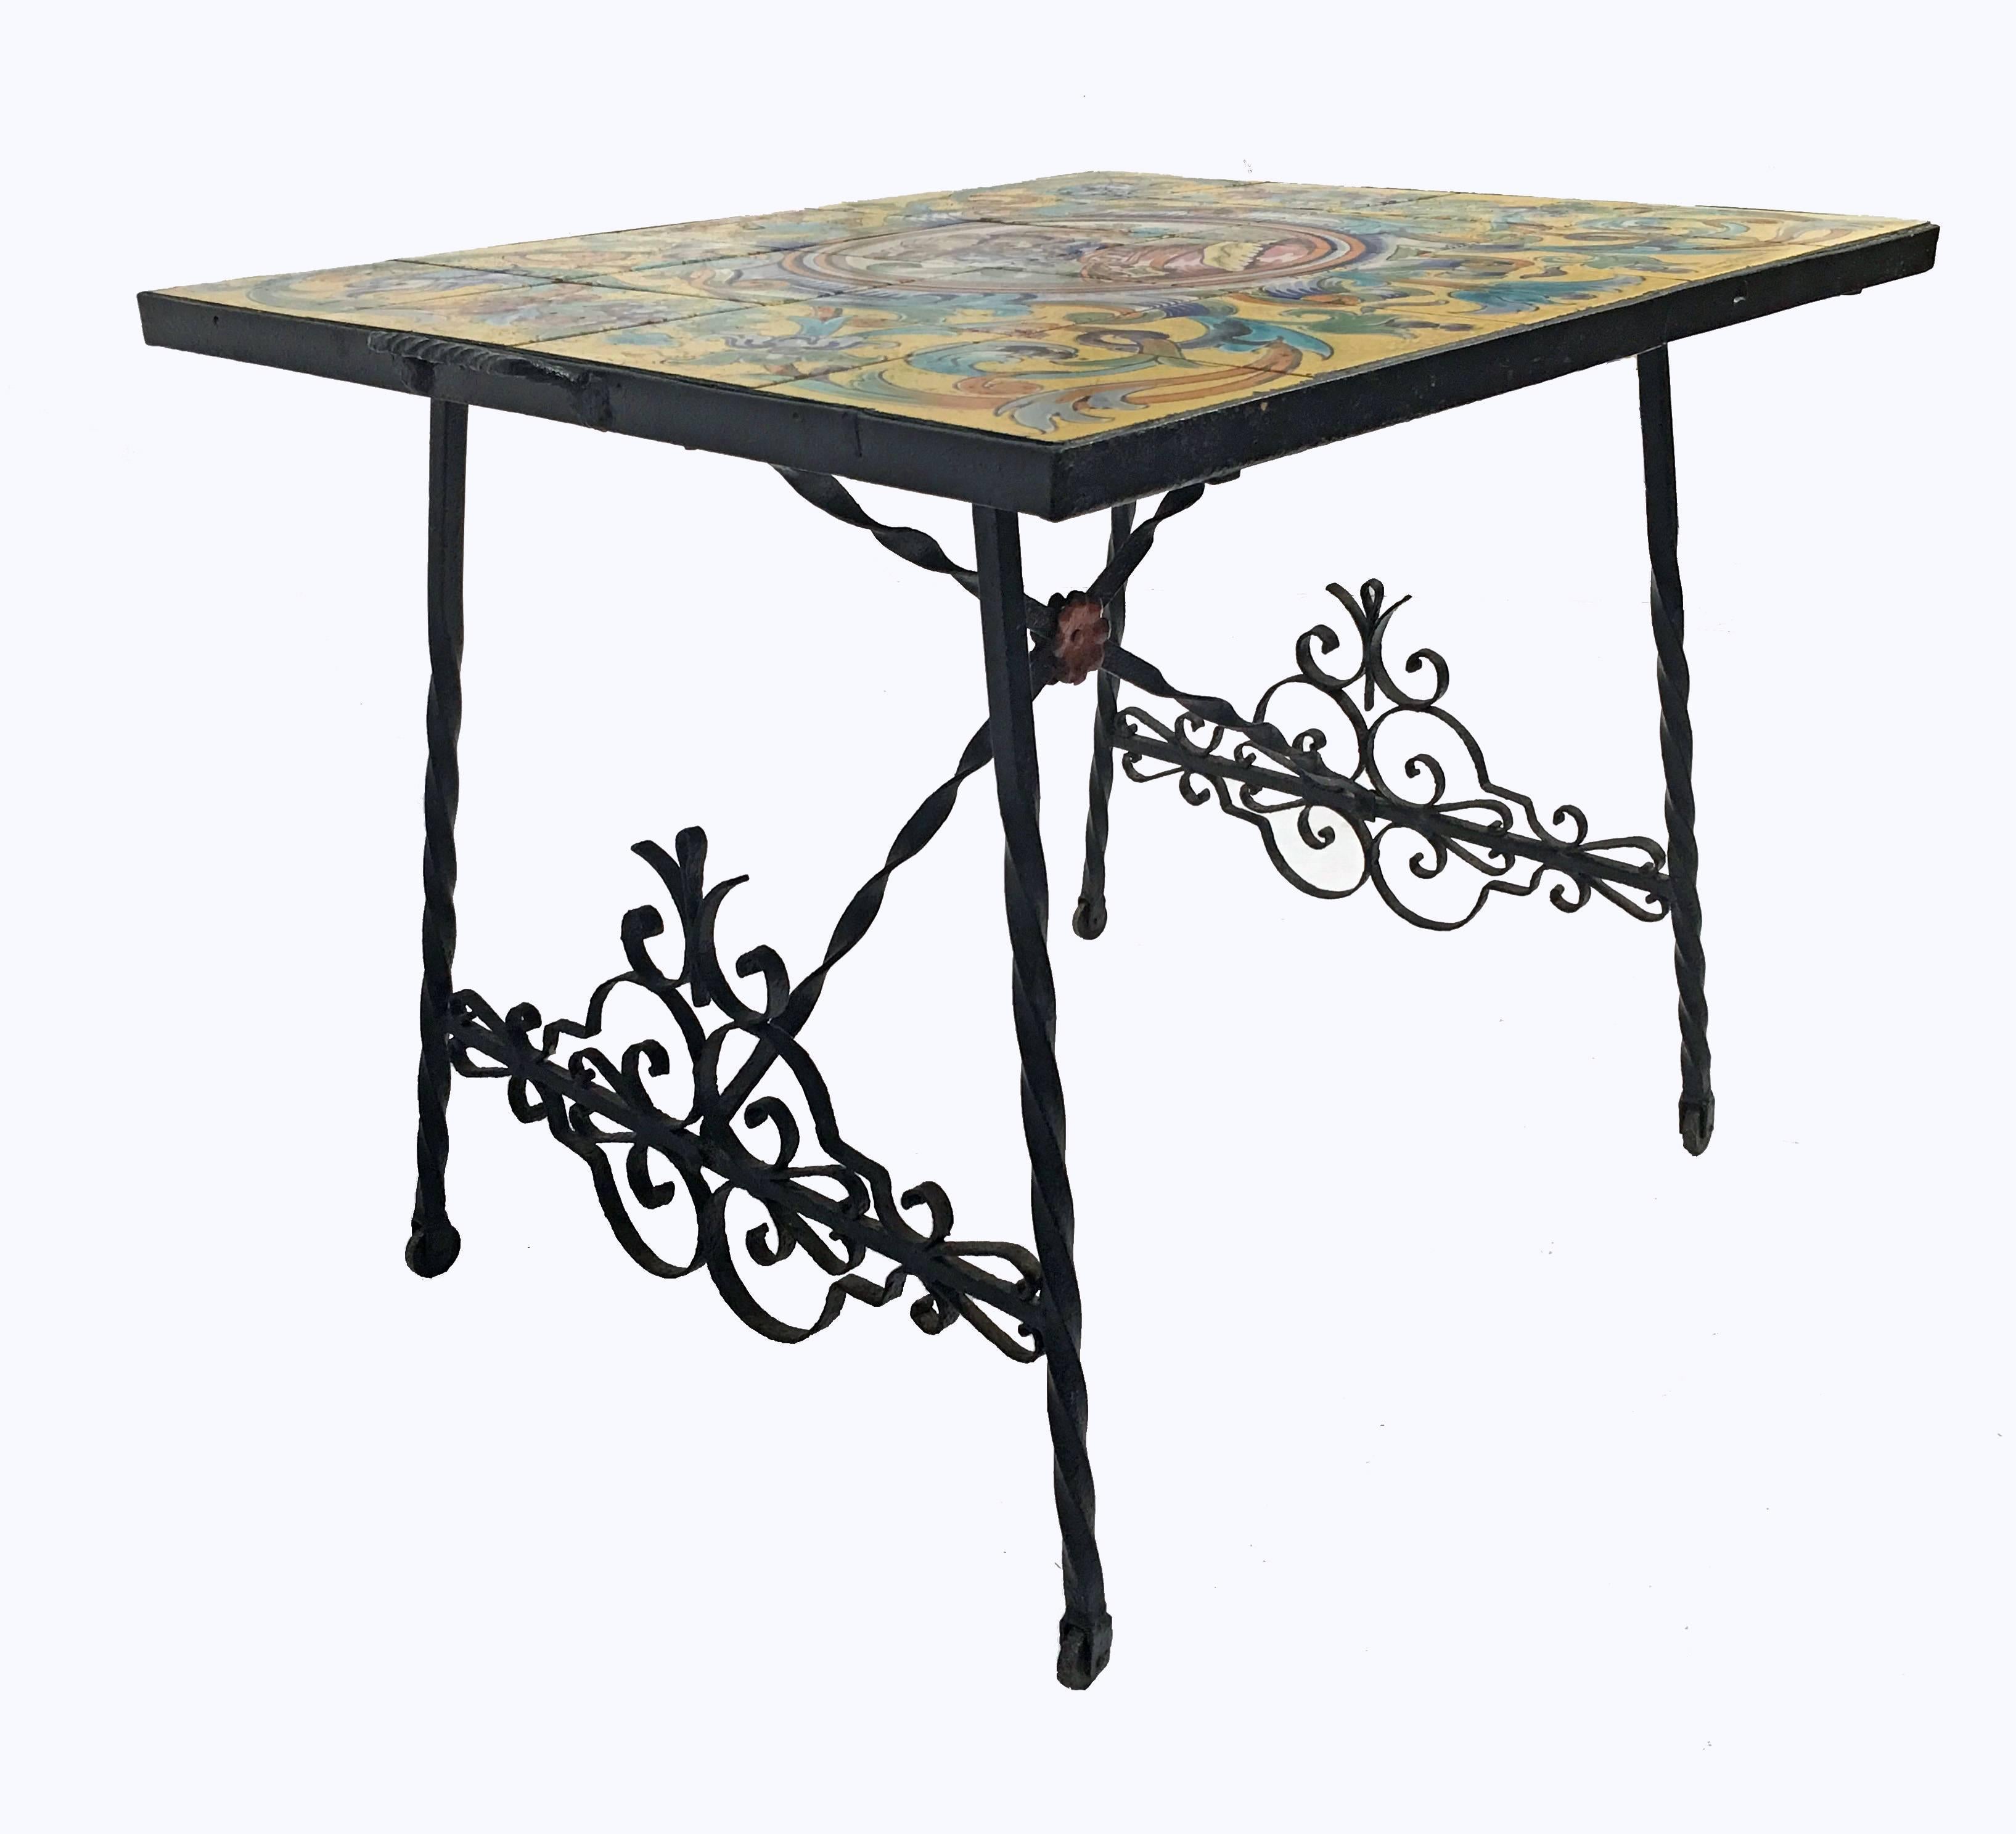 Brightly decorated tile top table rests on hand-wrought iron legs, handles and ornamental stretchers and trusses. Legs rest on functioning iron wheels. Artisan crafted ceramic tiles originating from Ceramica Santa Ana in Triana District Seville,